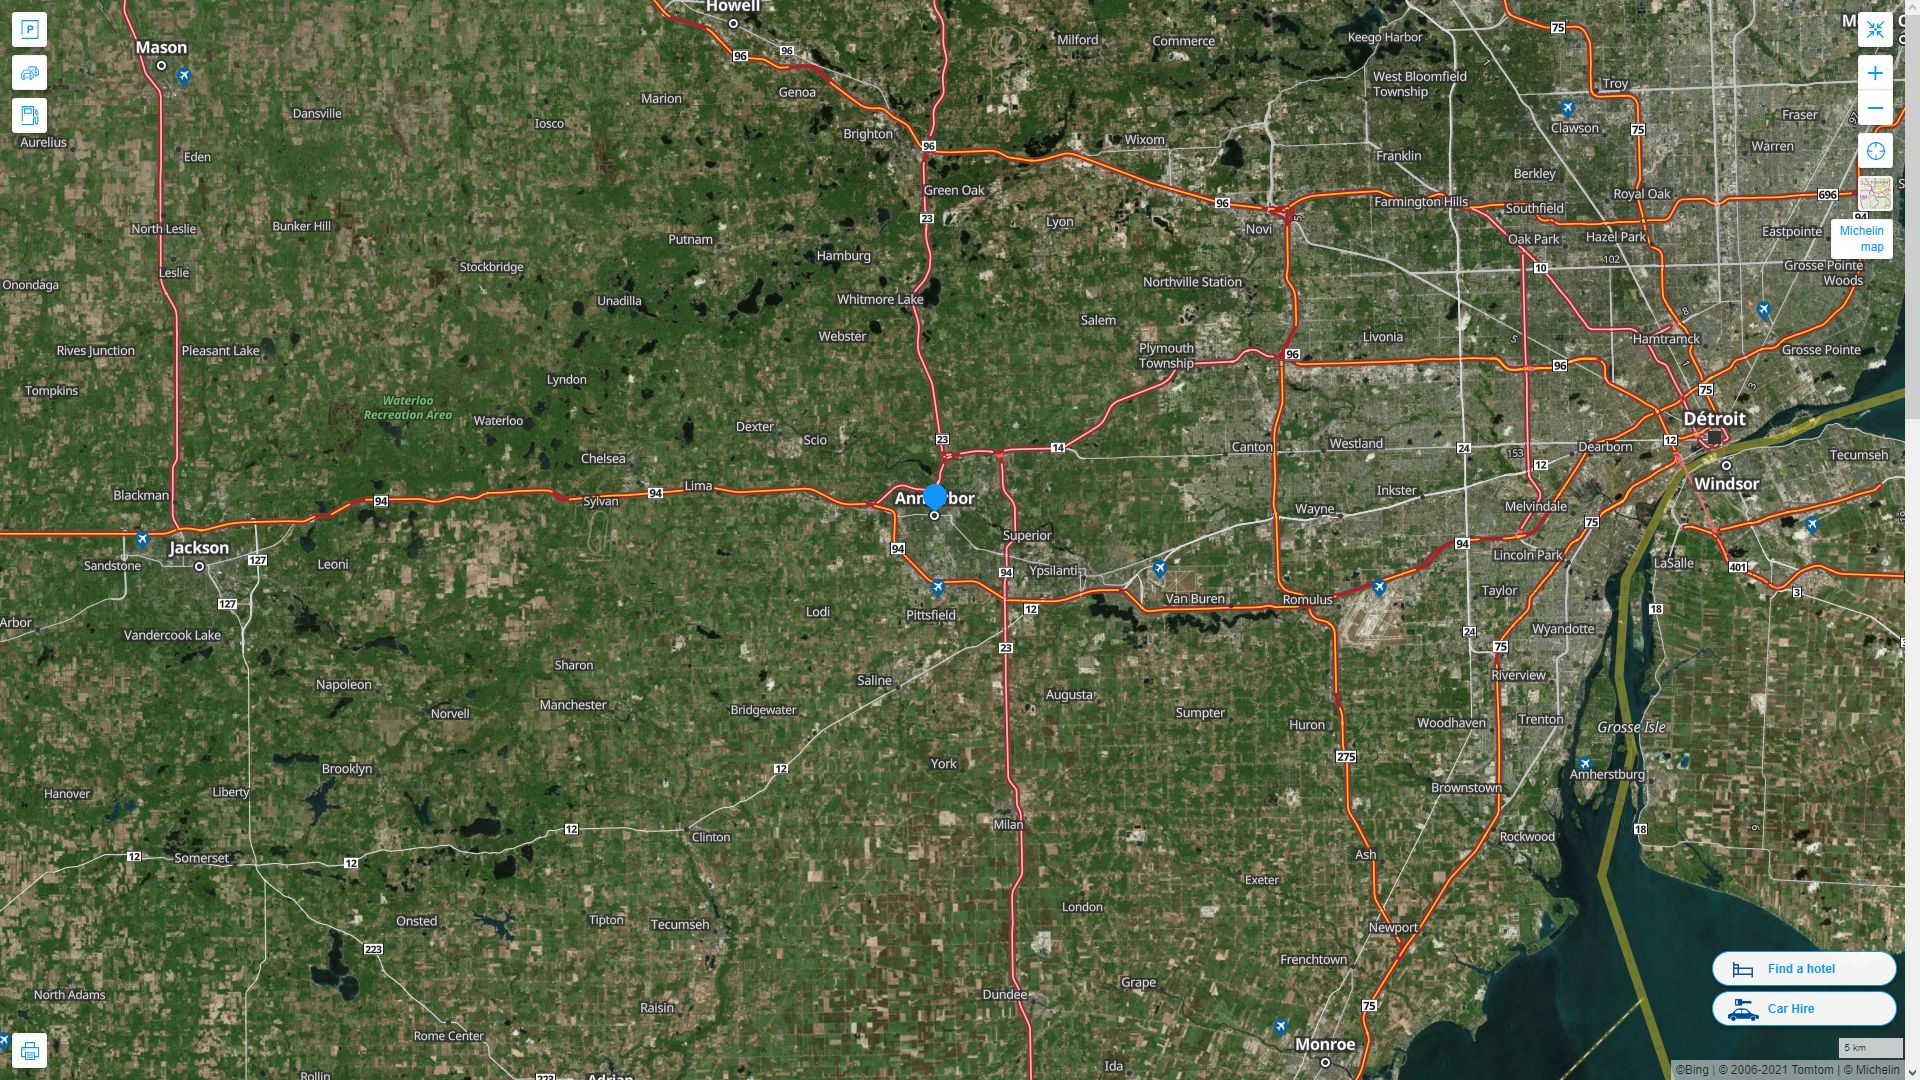 Ann Arbor Michigan Highway and Road Map with Satellite View